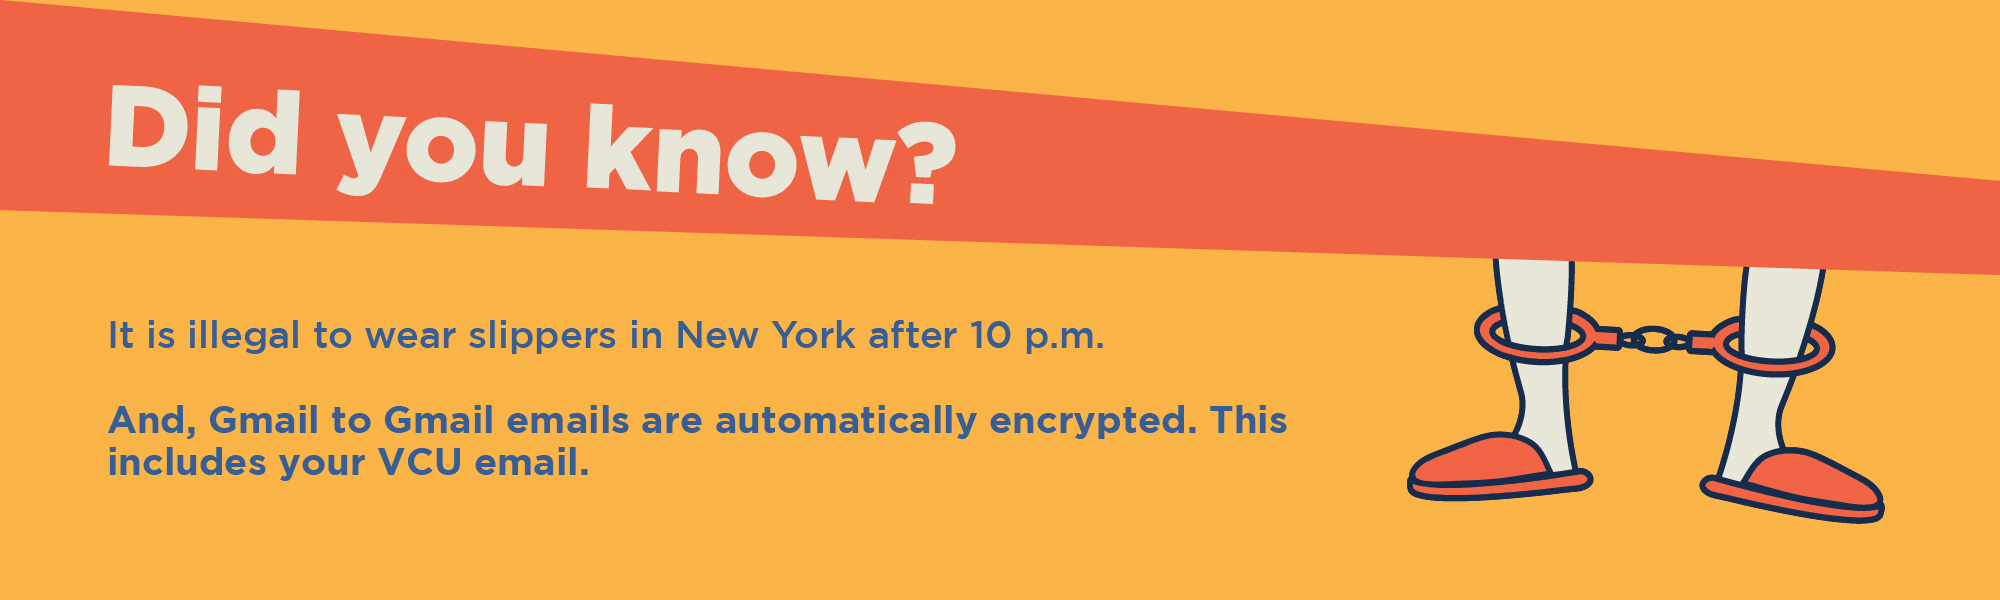 Did you know? It is illegal to wear slippers in New York after 10 P.M. And Gmail to Gmail emails are automatically encrypted. This includes your VCU email.